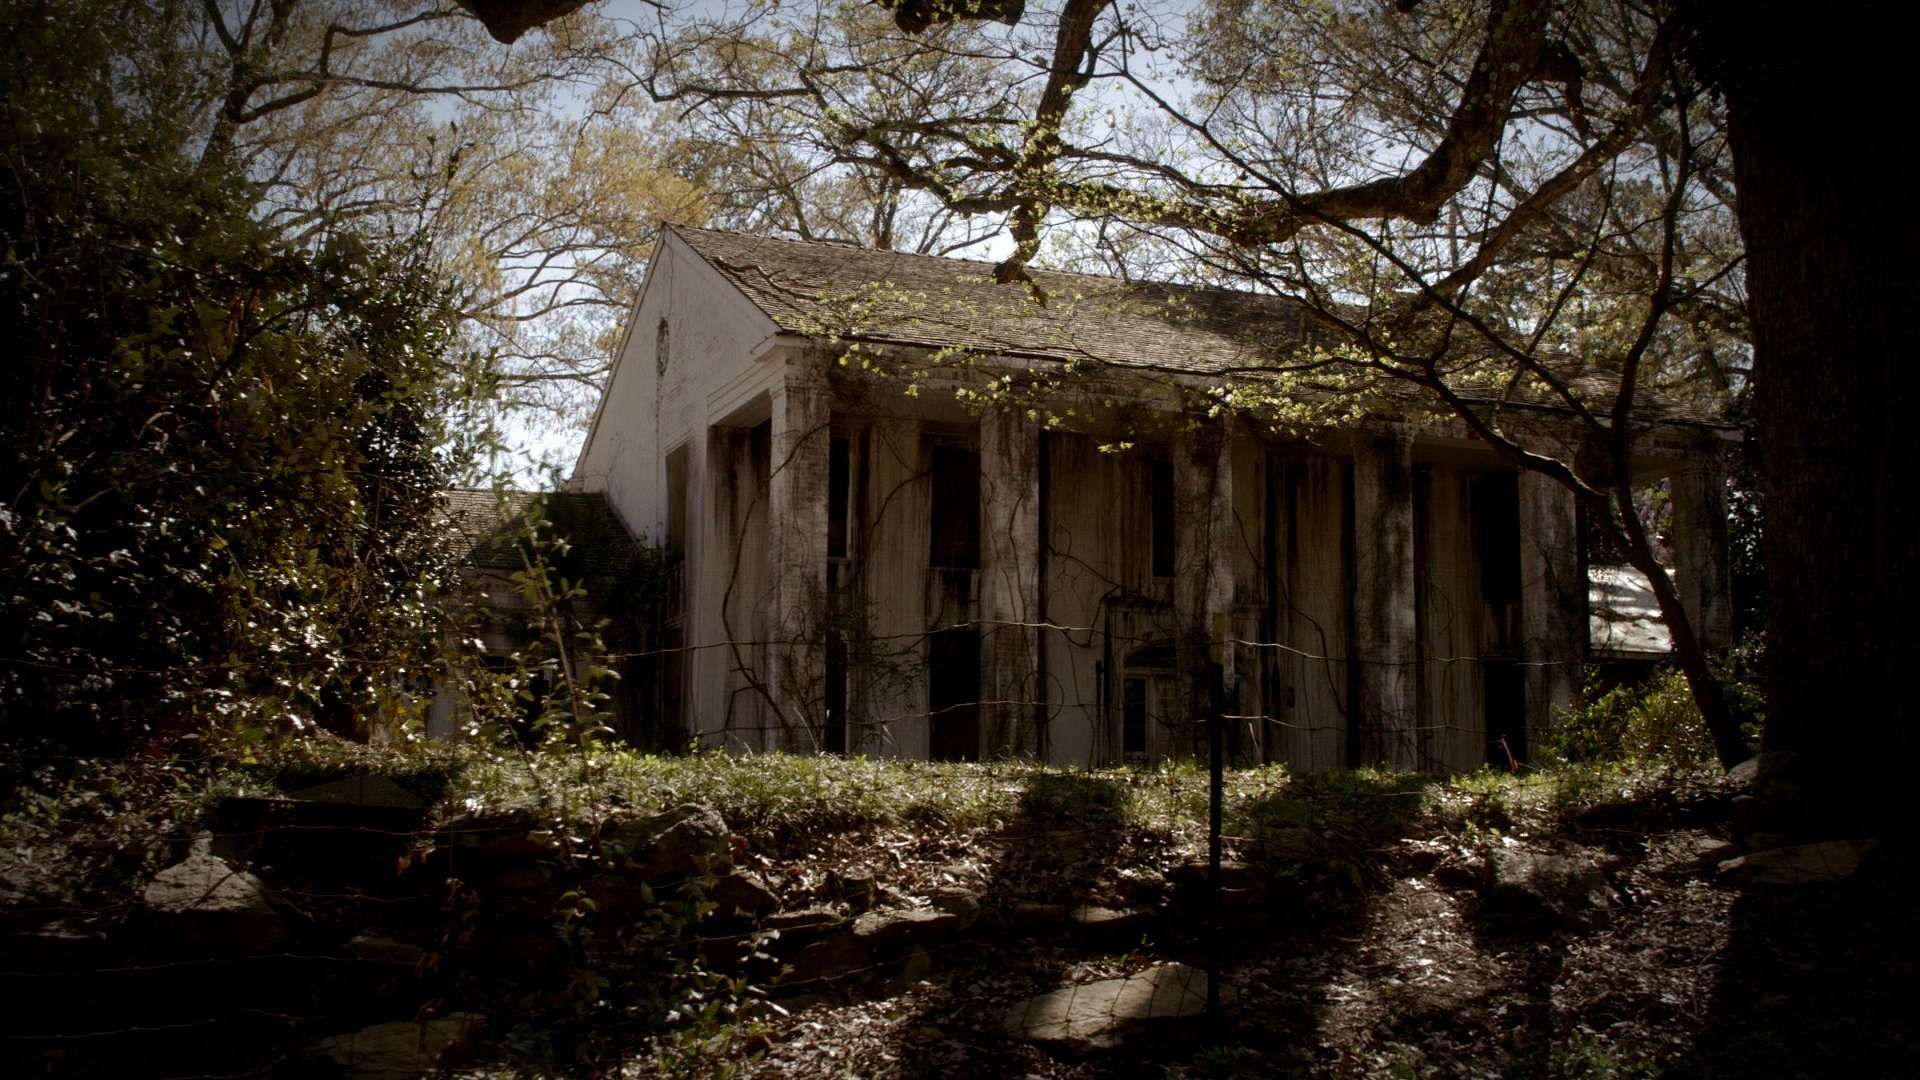 http://images2.wikia.nocookie.net/__cb20120418173352/vampirediaries/images/3/31/Witch_house.jpg